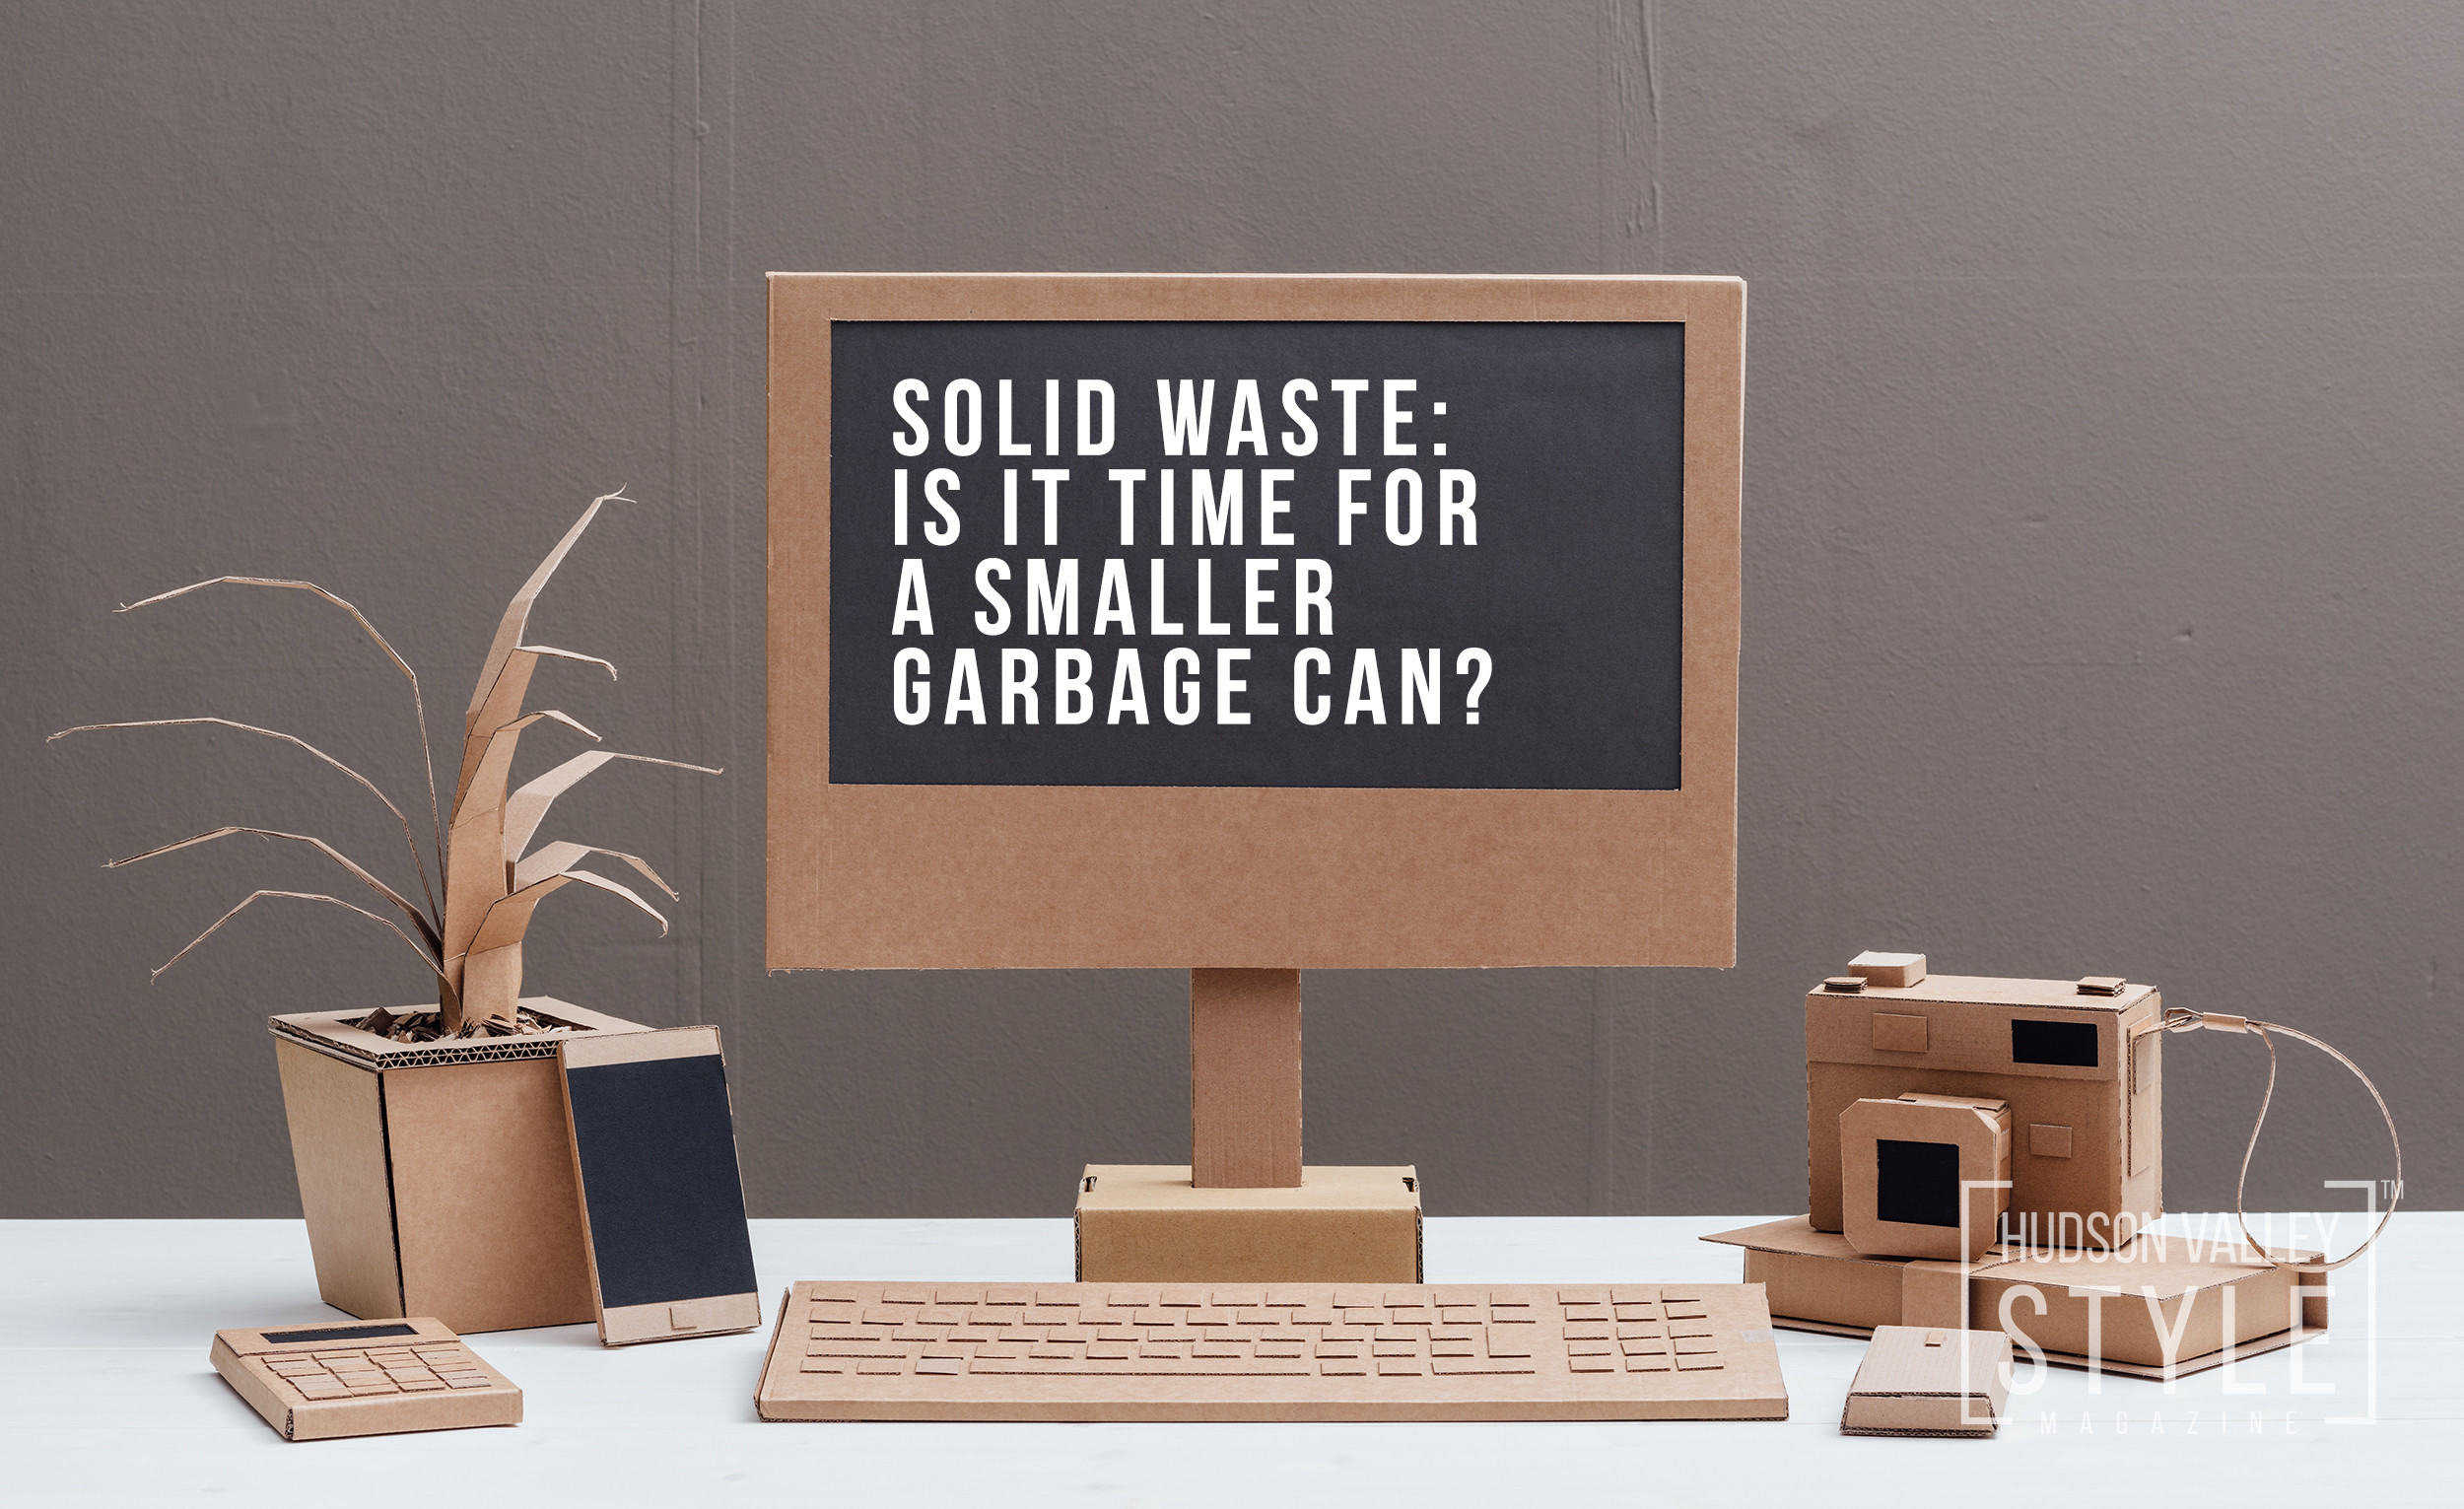 Solid waste: Is it time for a smaller garbage can?